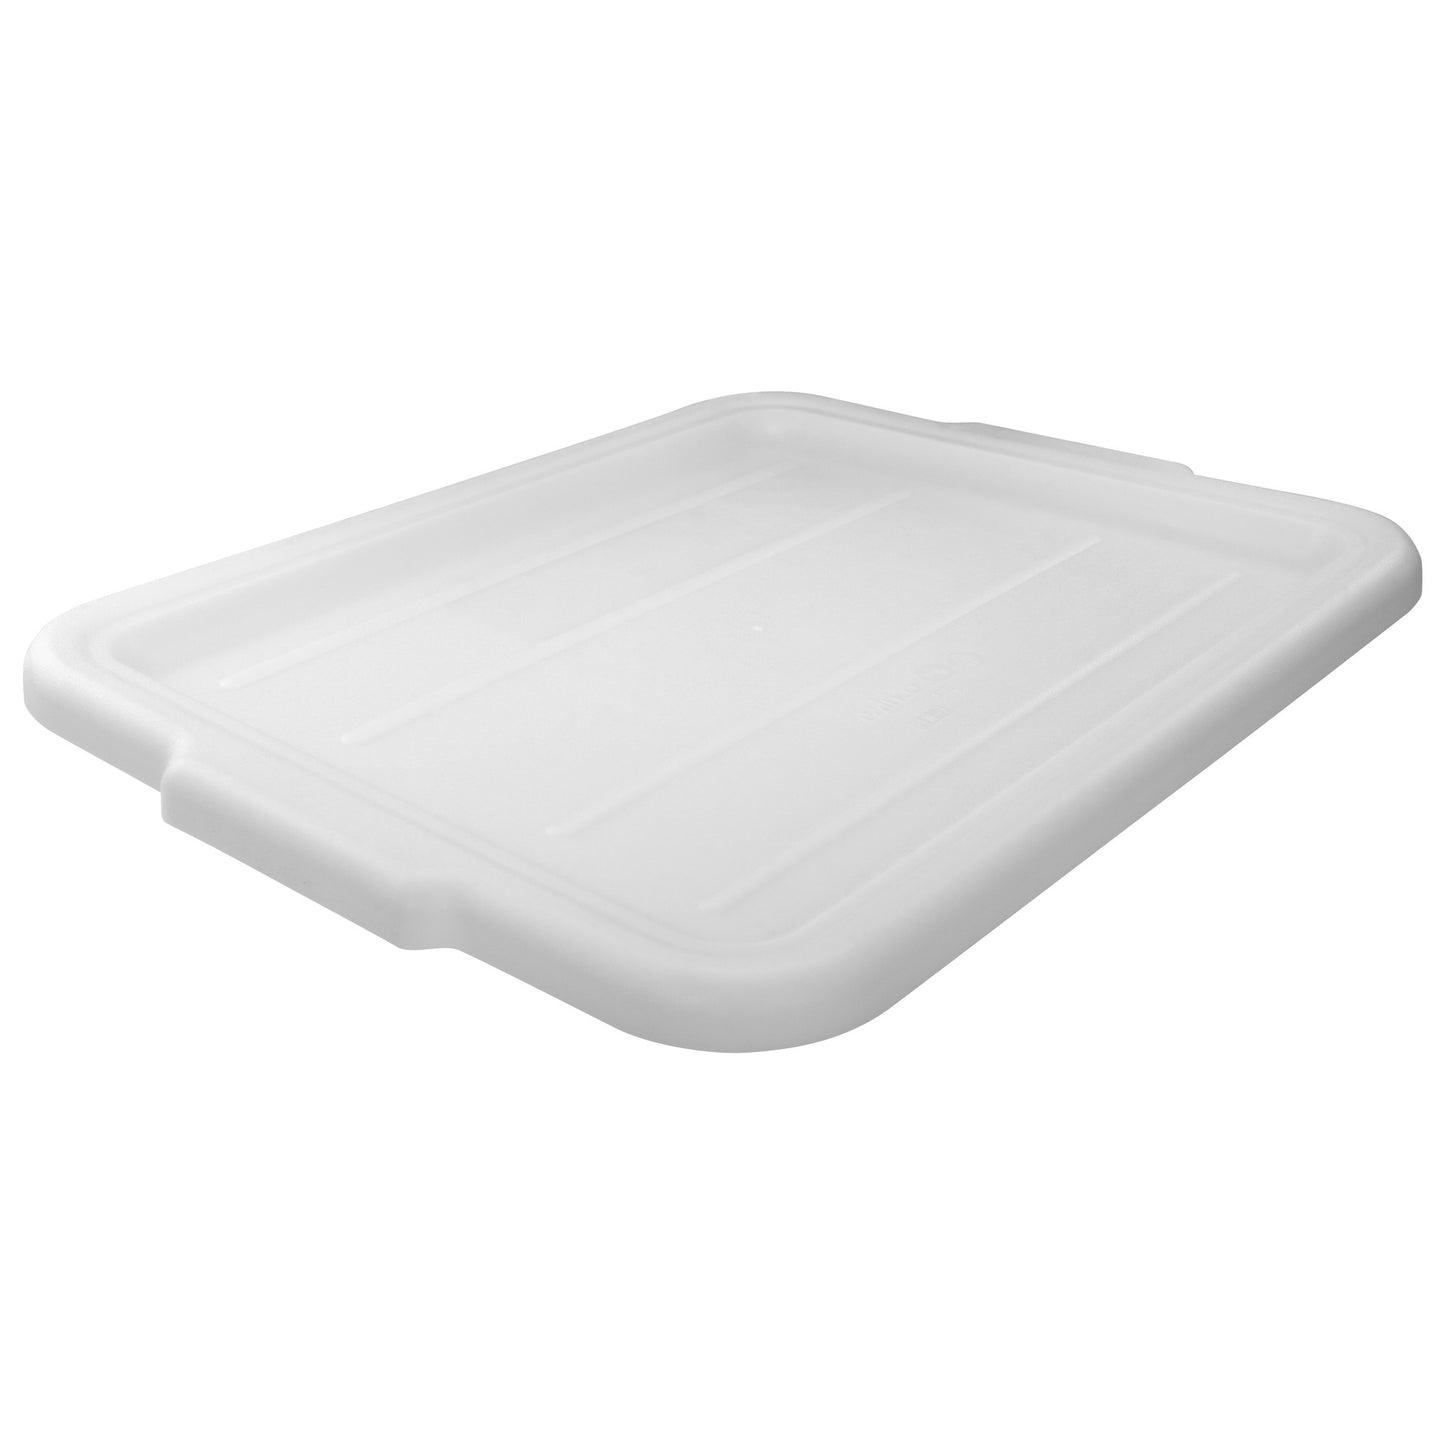 Cover for PLW-7 Series Dish Boxes - White